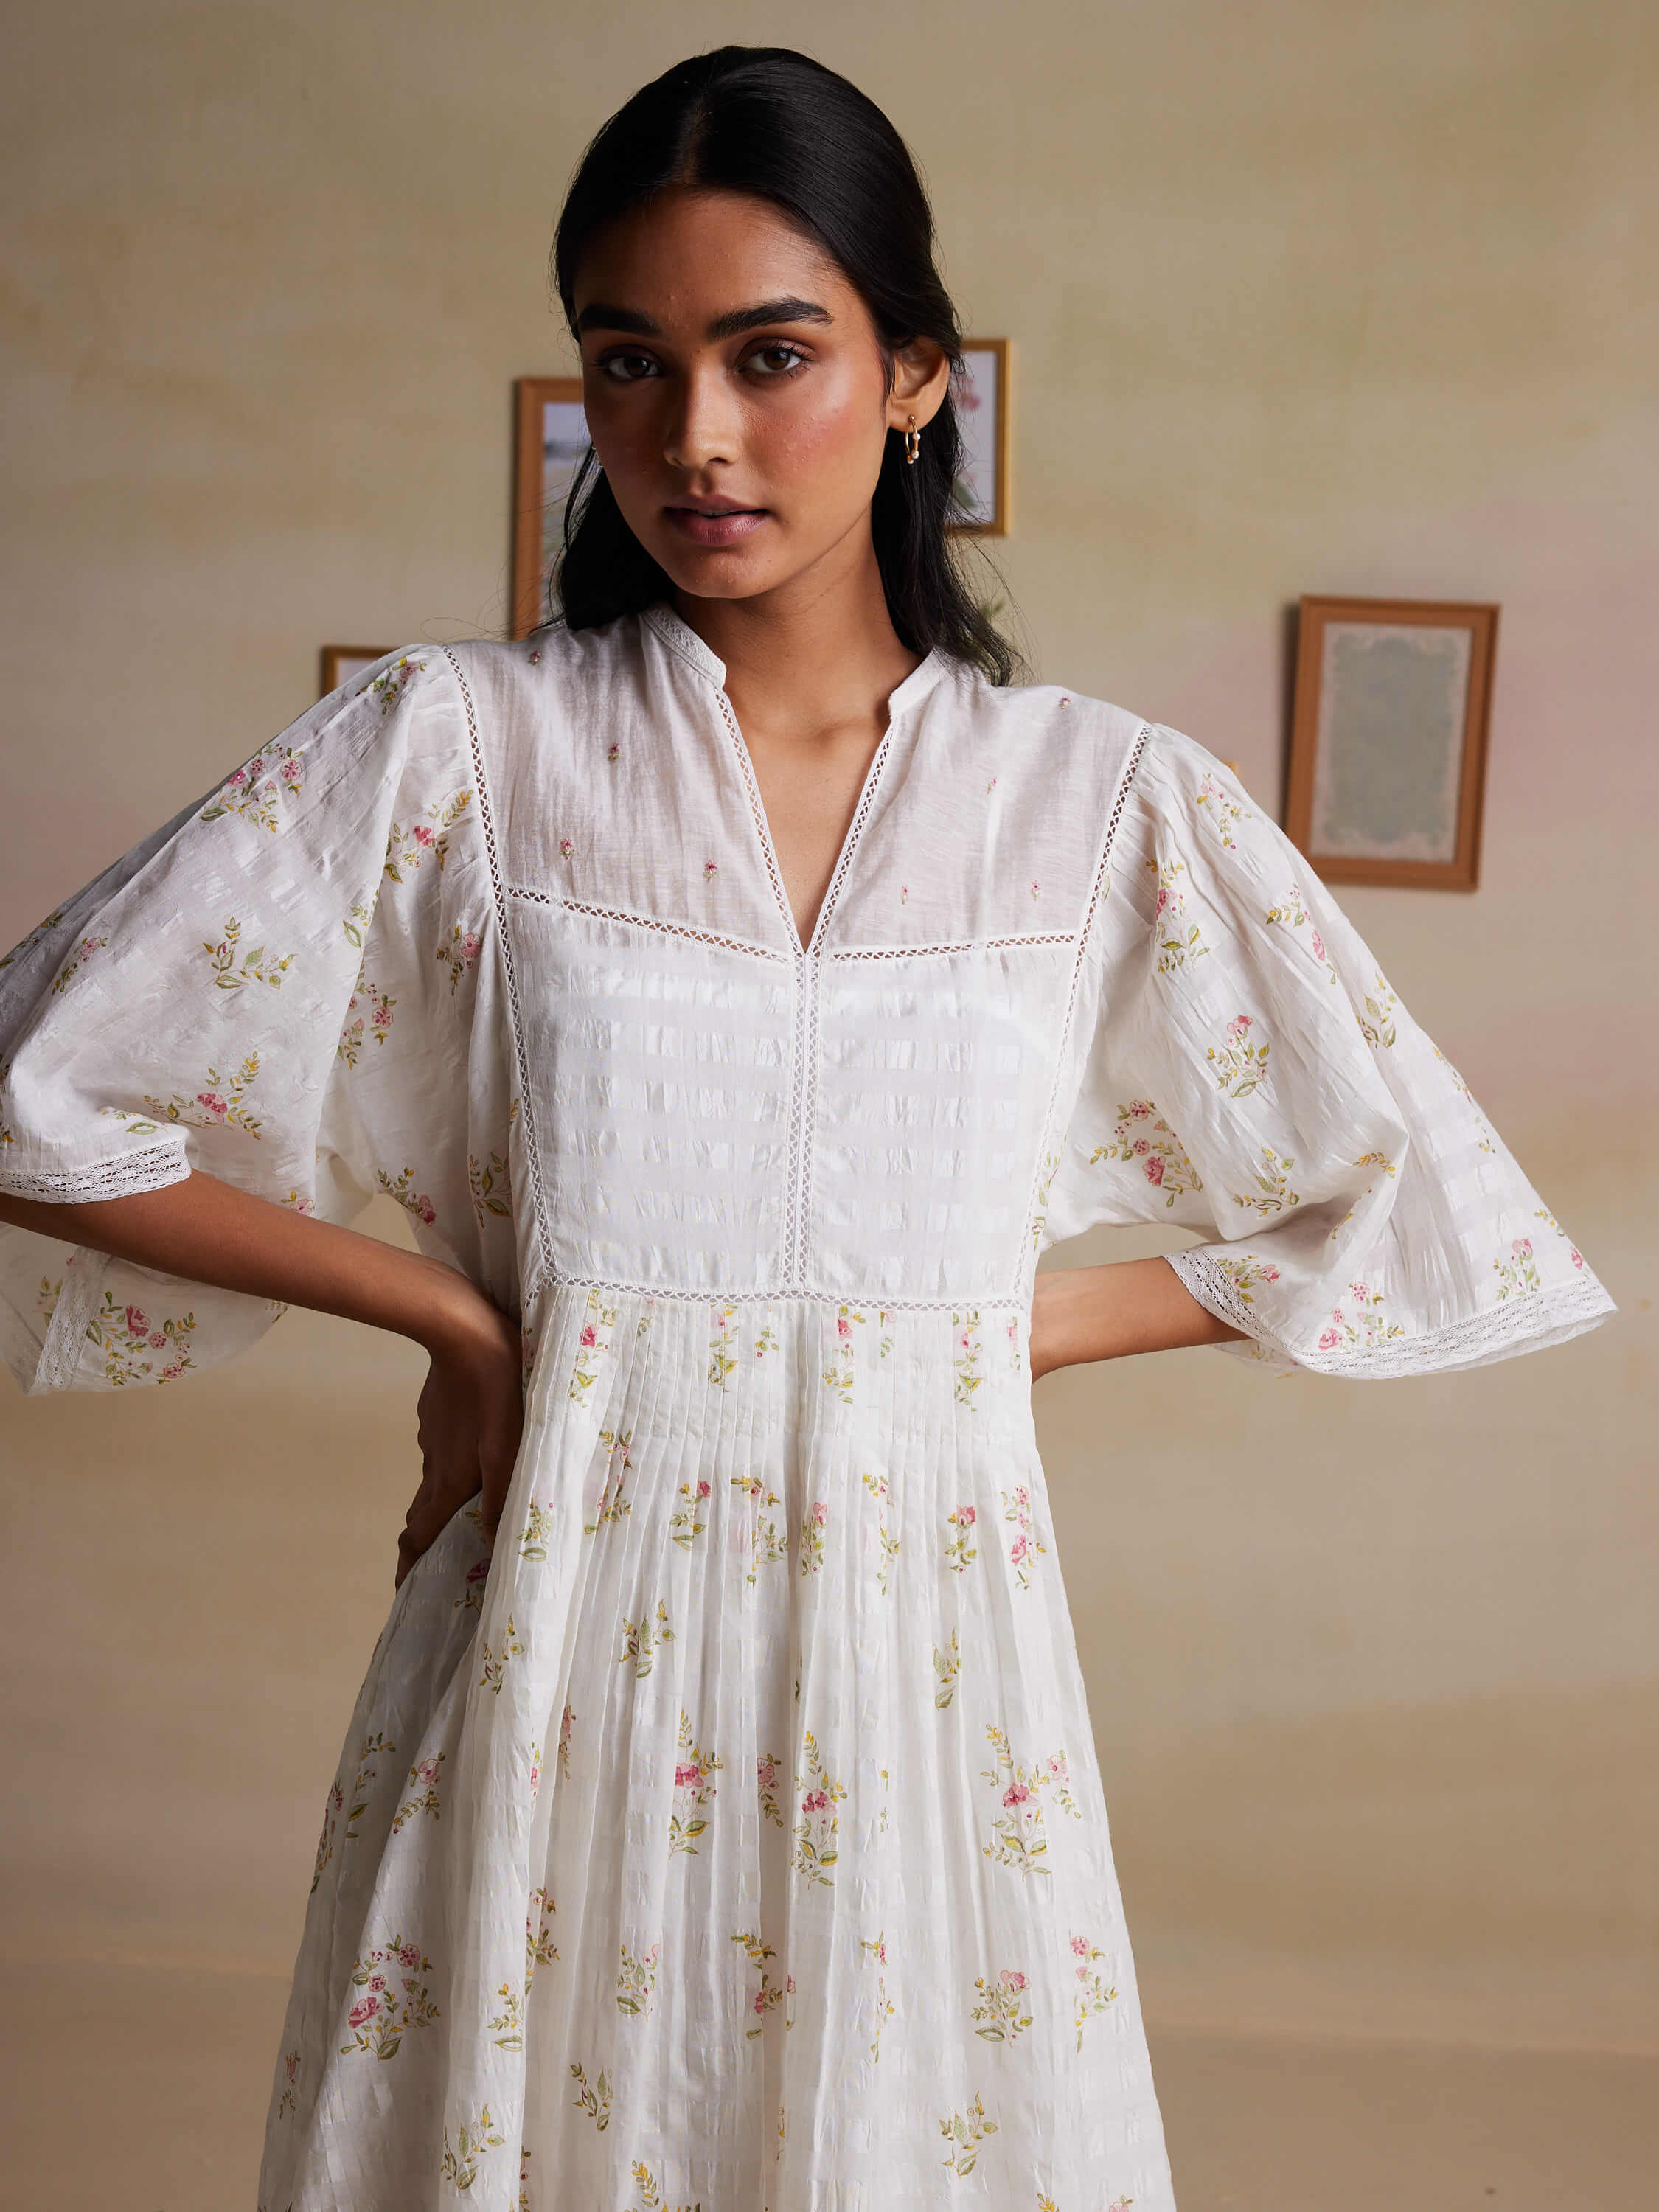 Woman wearing floral white dress with loose sleeves, posing indoors.